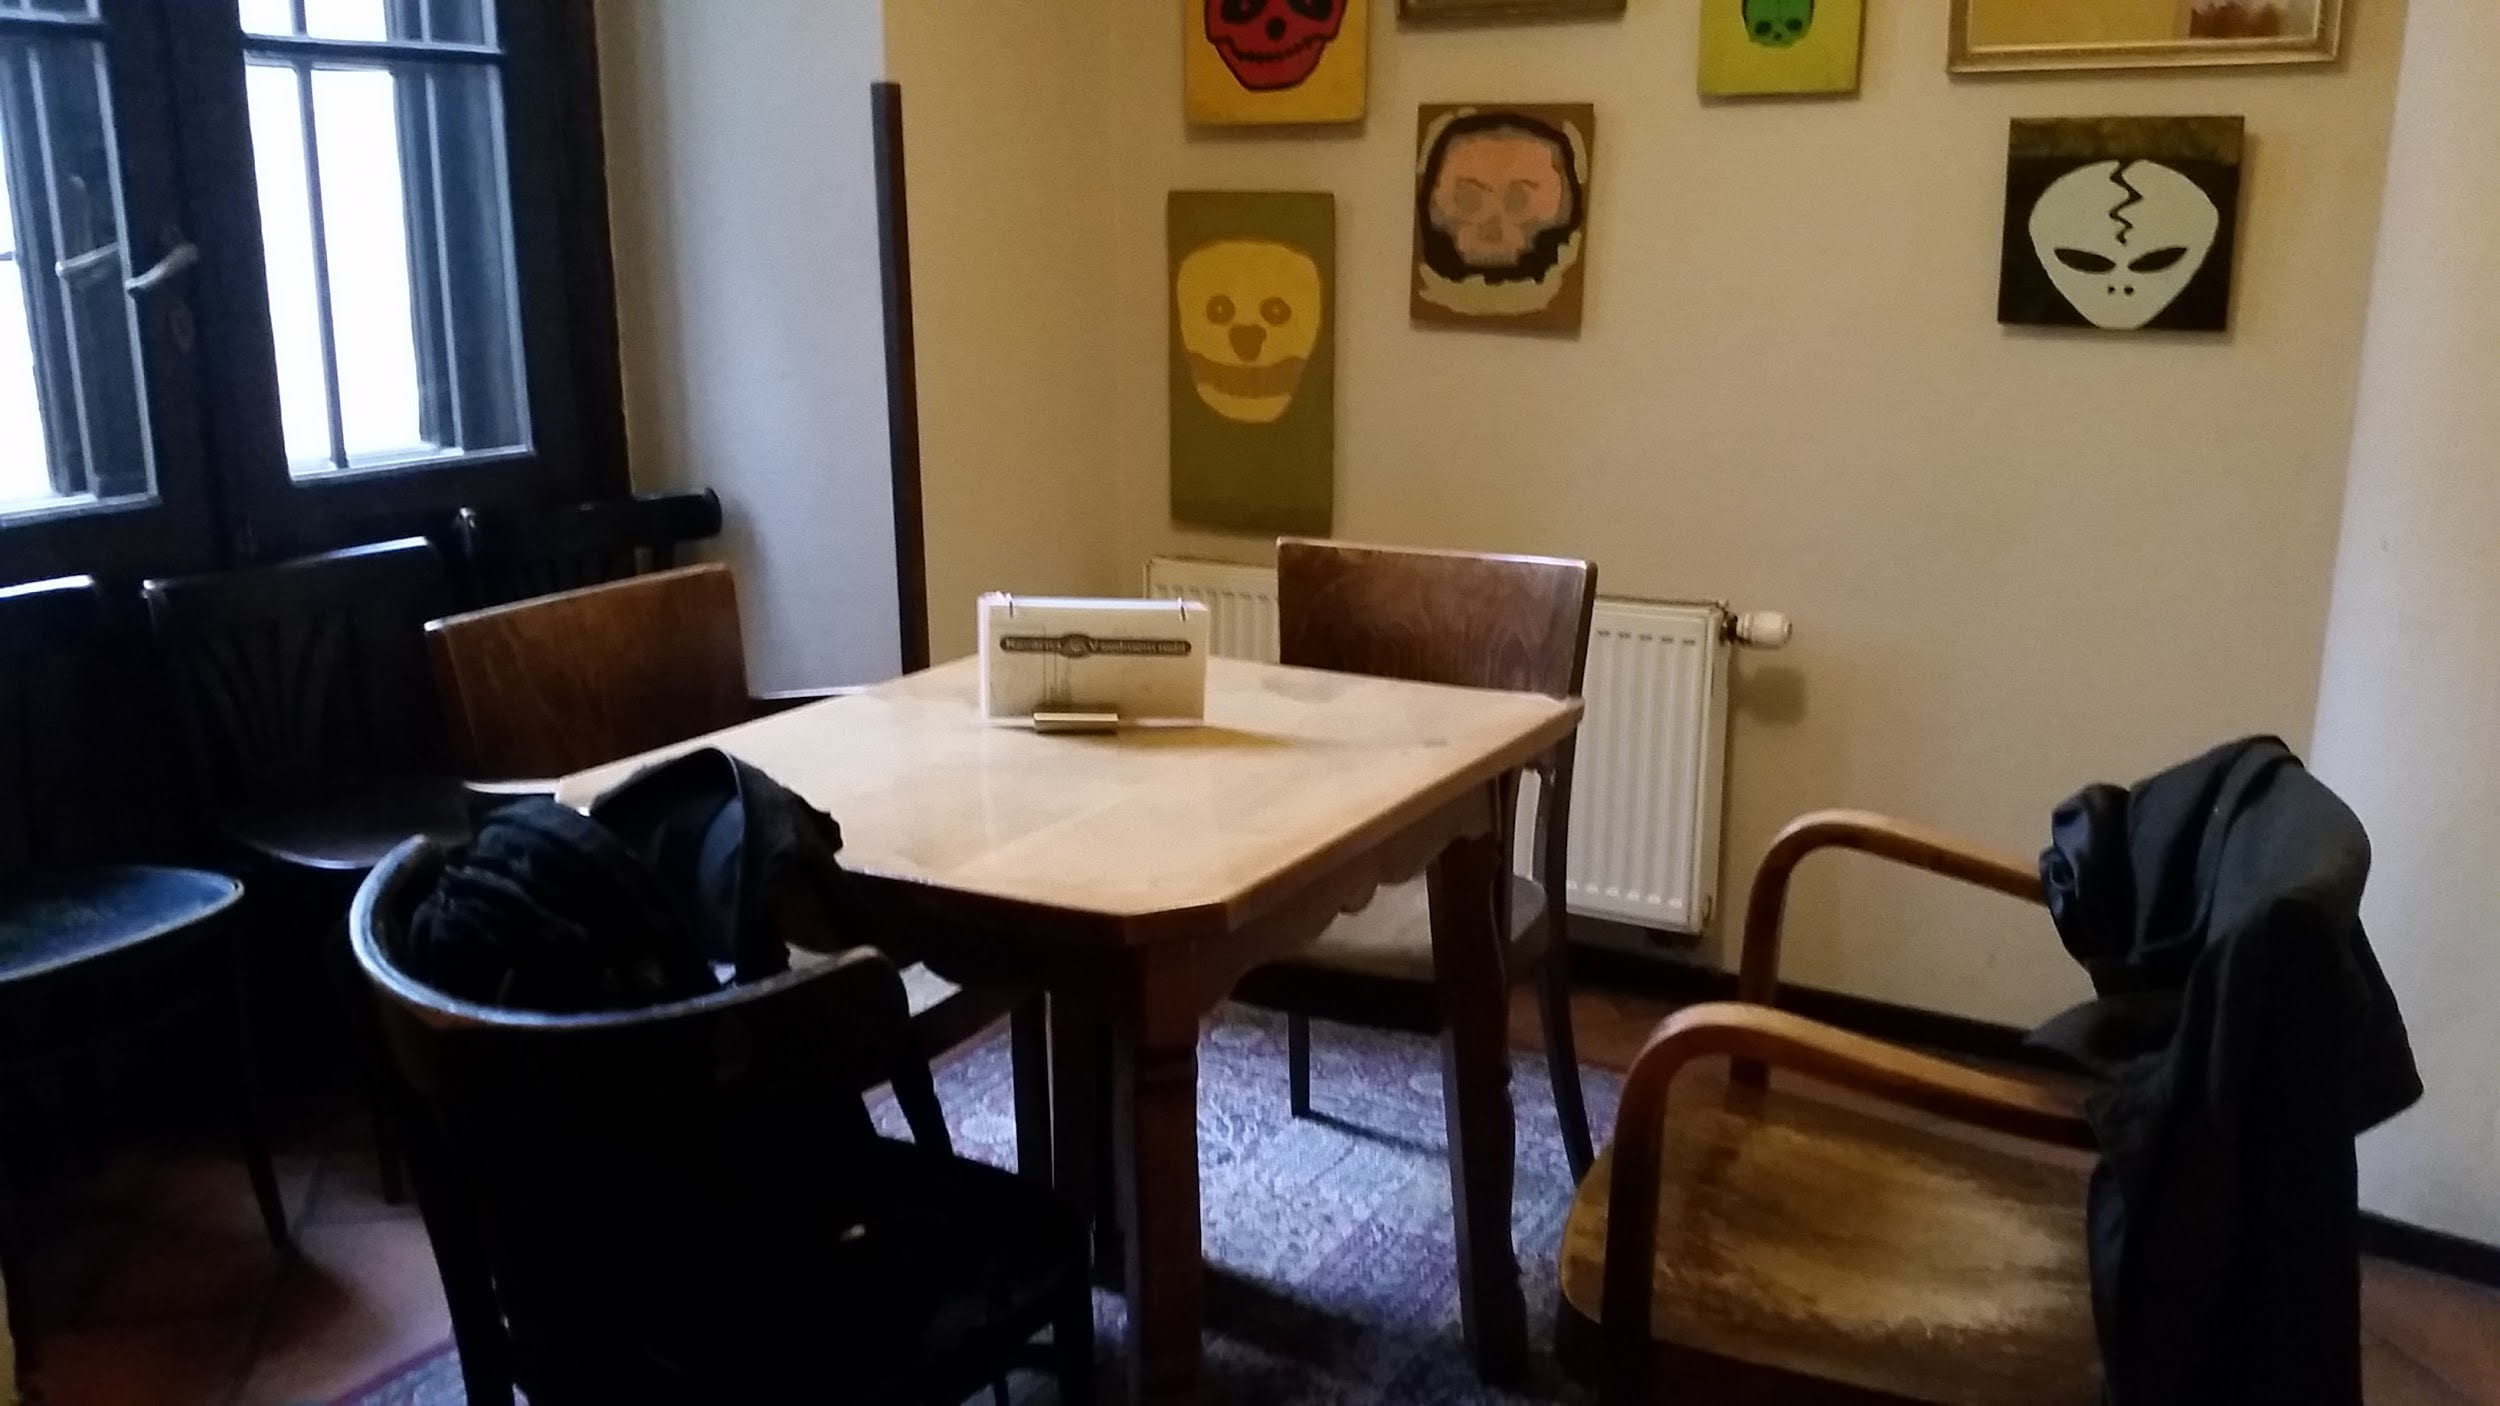 Back room in a small cafe with table and chairs